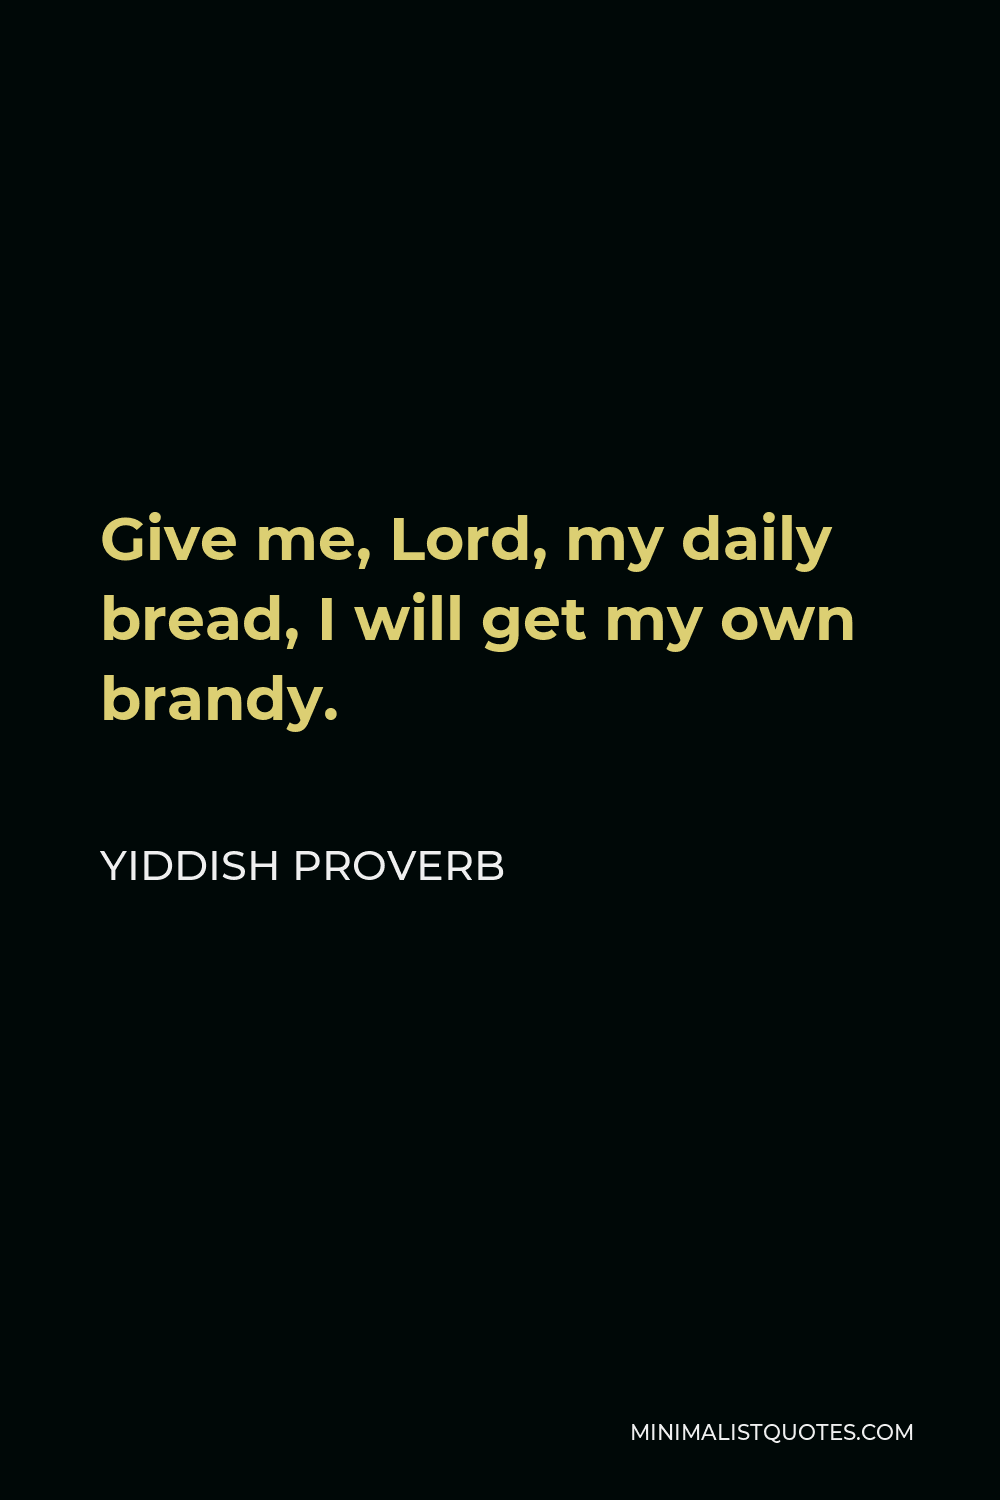 Yiddish Proverb Quote - Give me, Lord, my daily bread, I will get my own brandy.